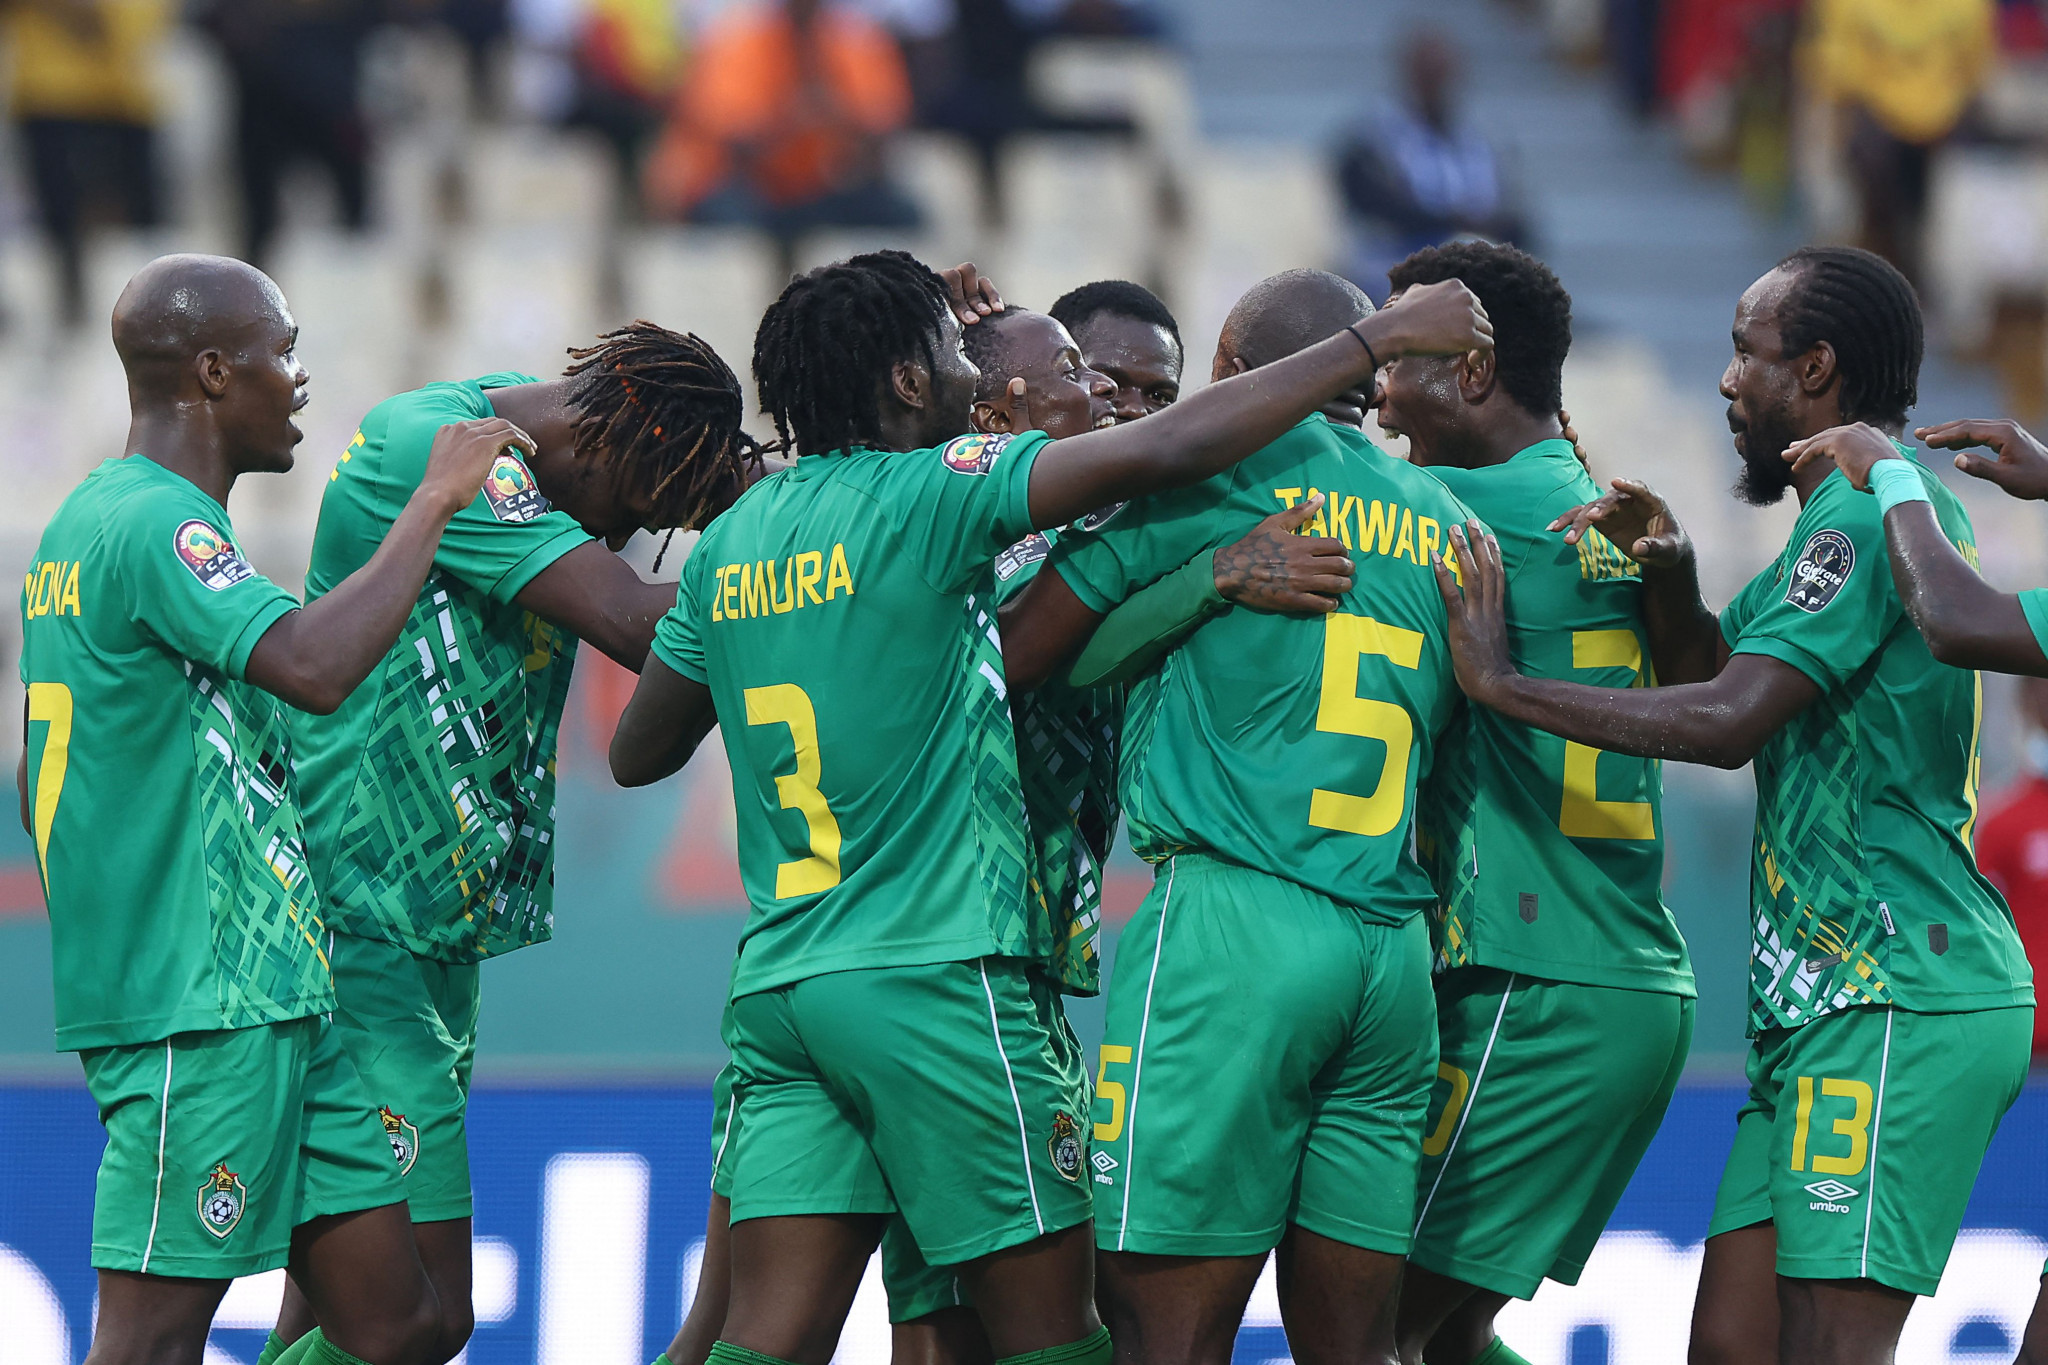 Kenya and Zimbabwe included in 2023 Africa Cup of Nations qualifying draw despite FIFA suspensions